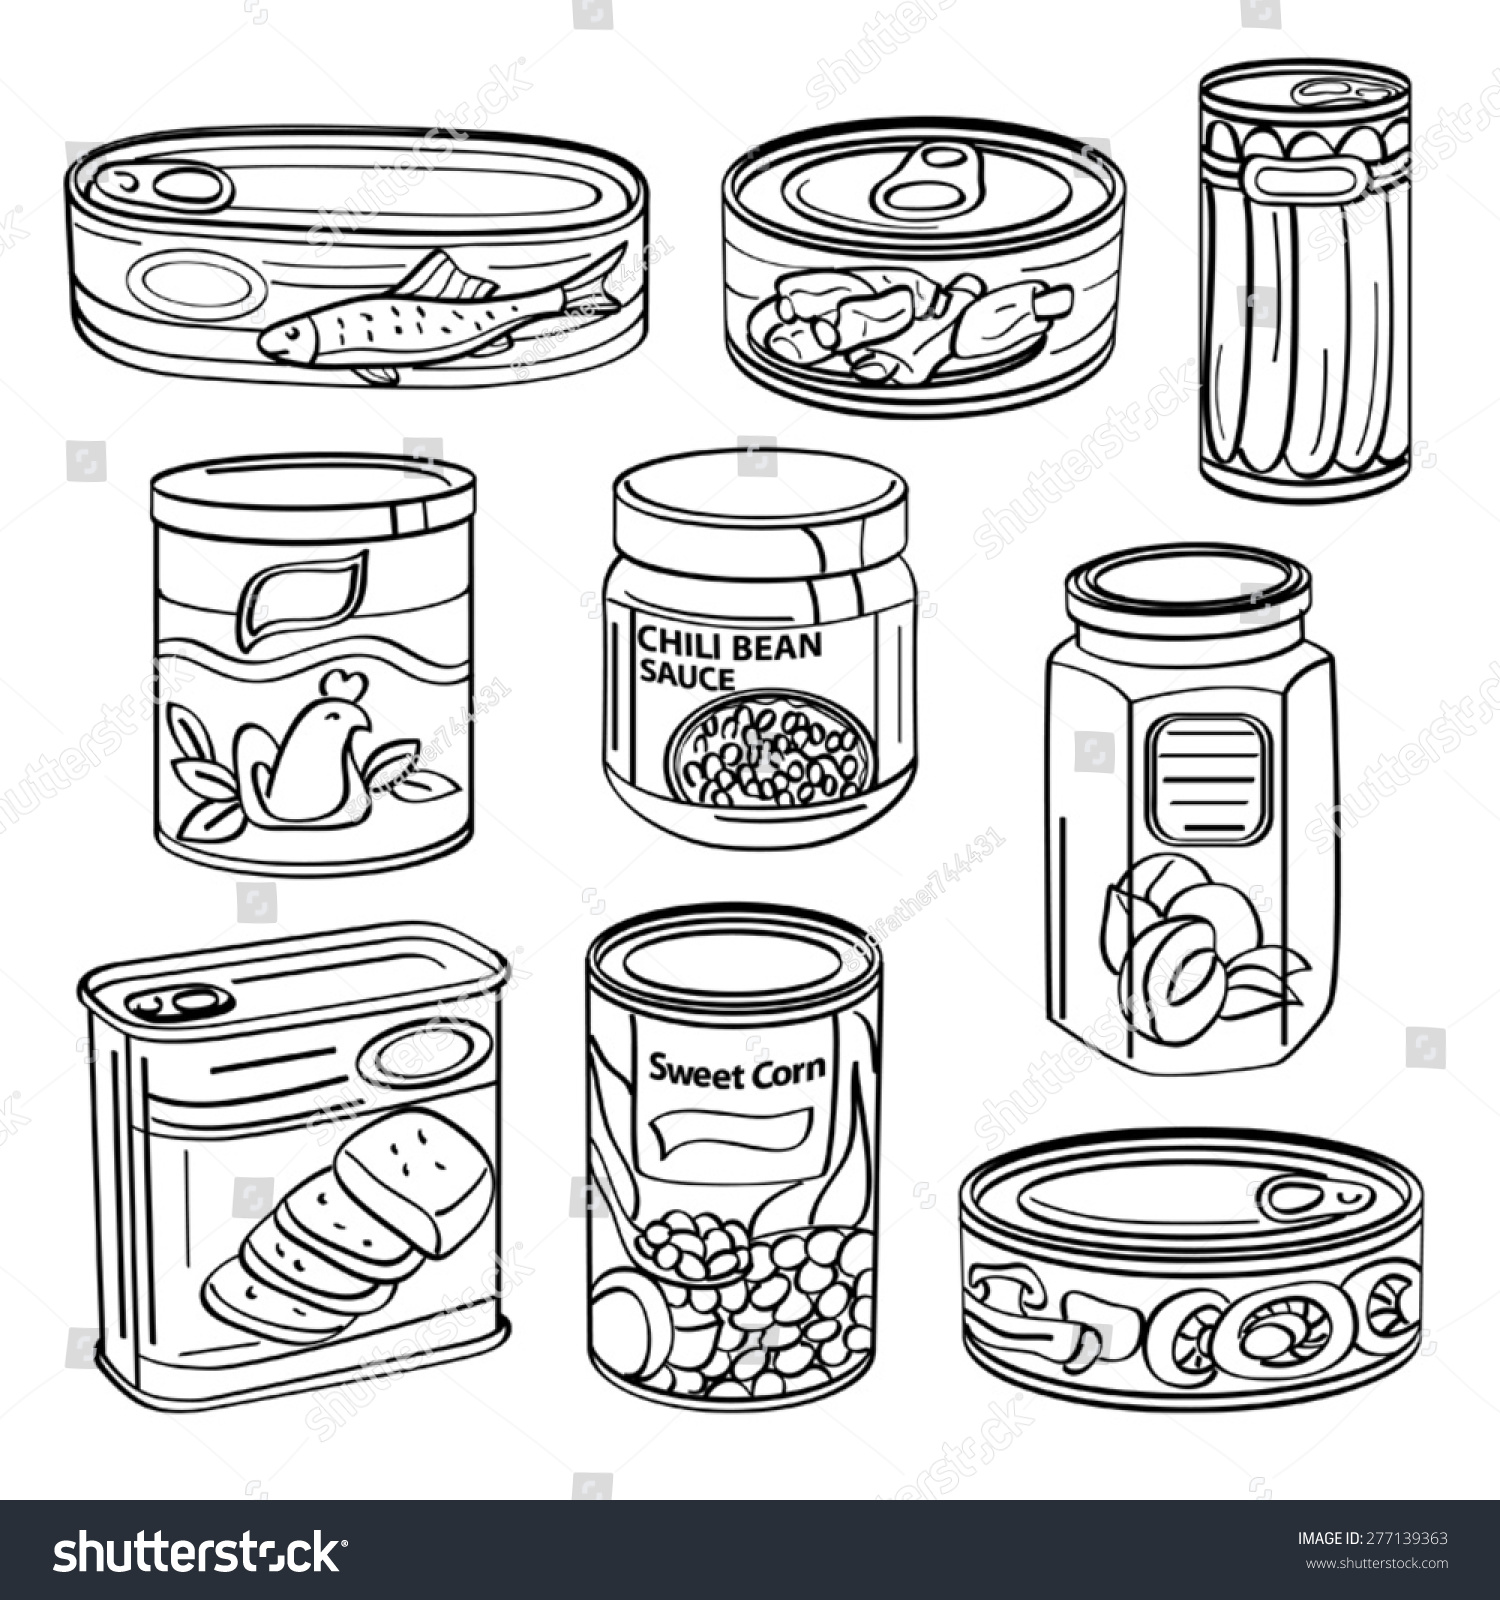 36,021 Canned food draw Images, Stock Photos & Vectors Shutterstock